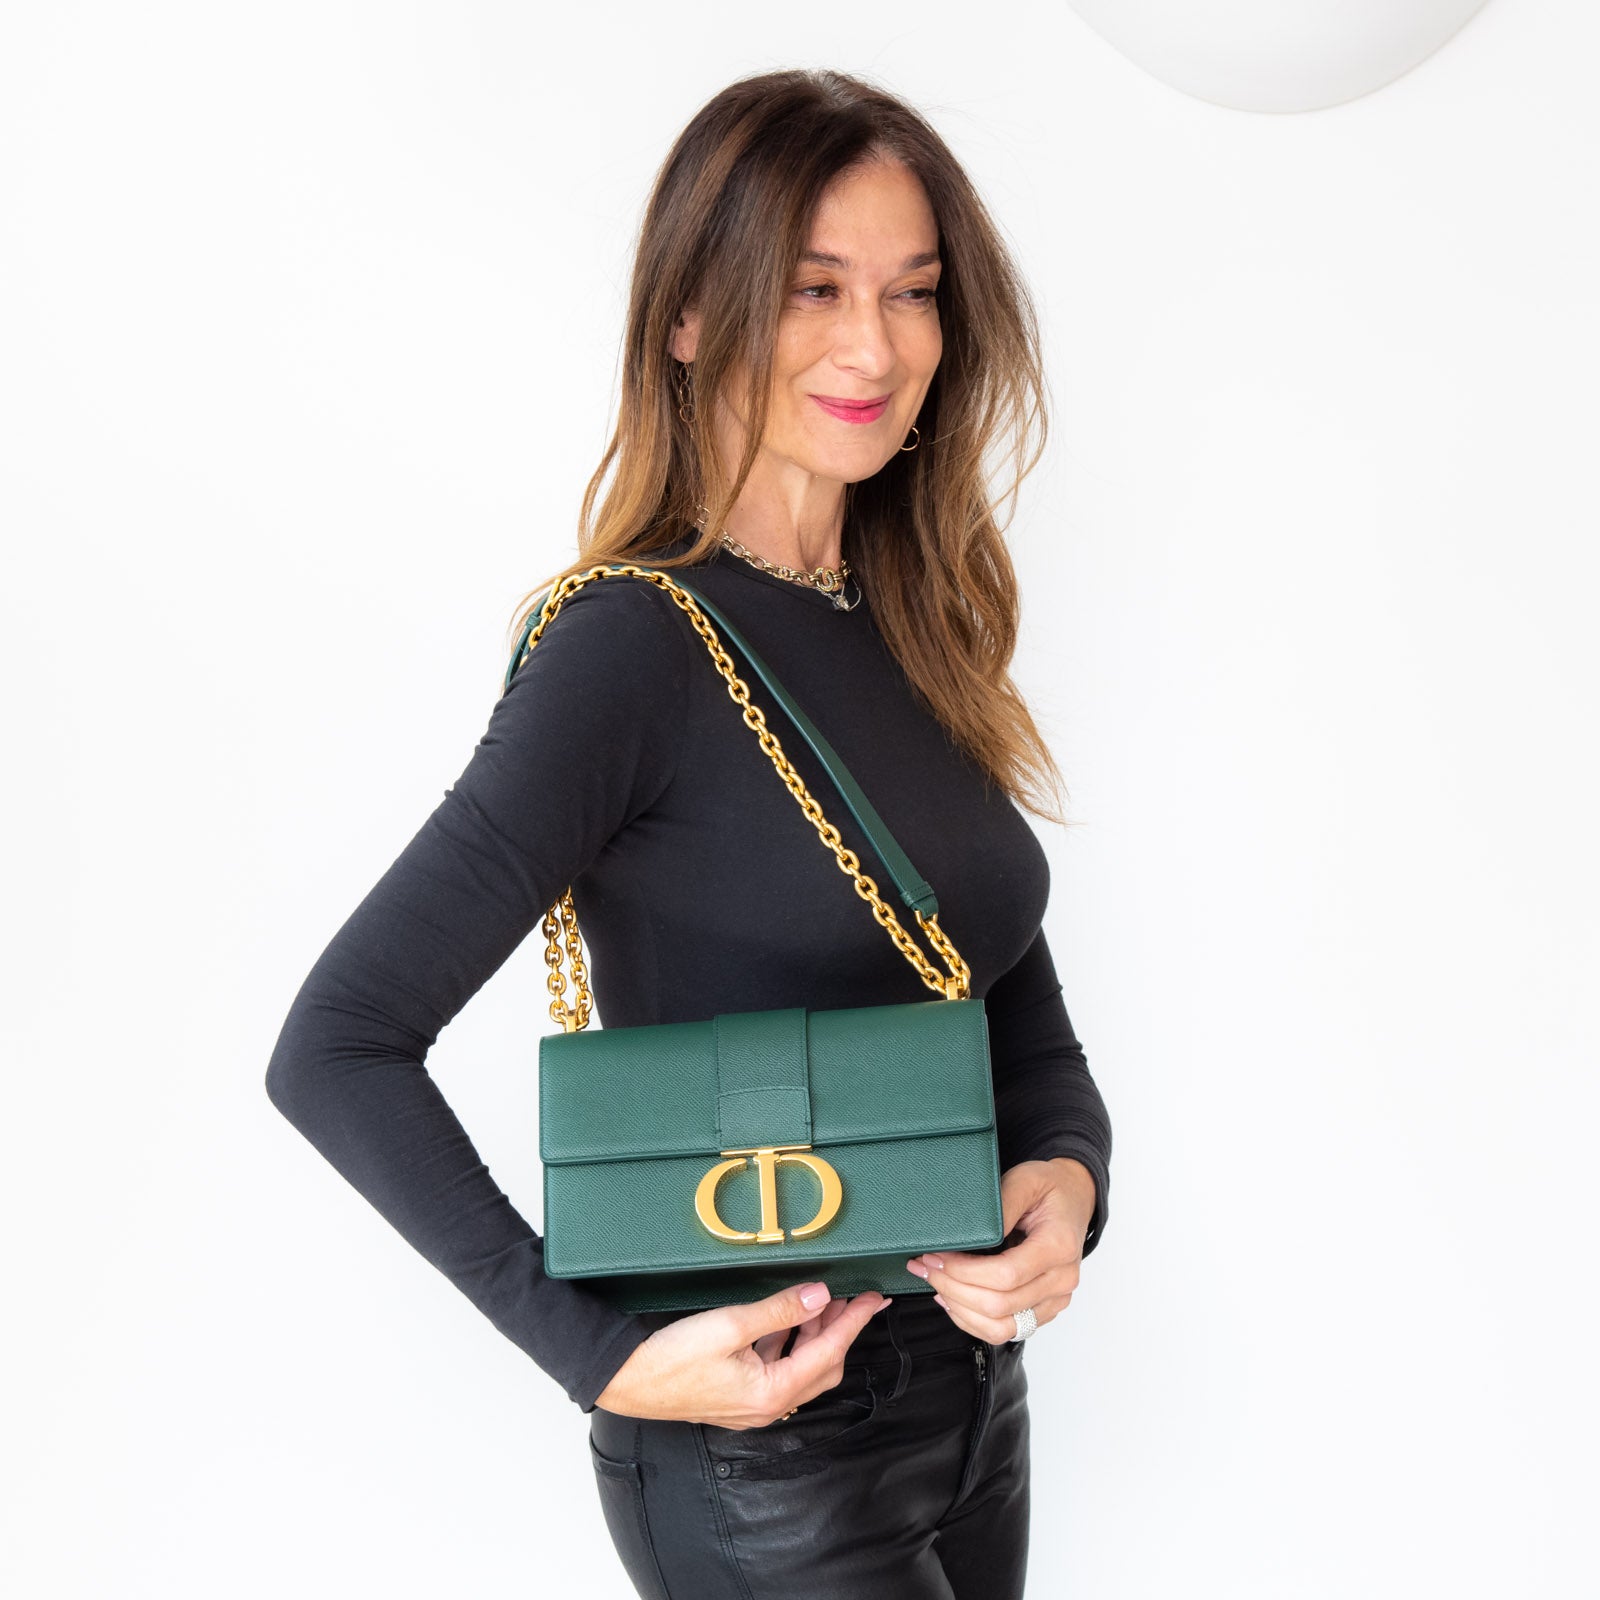 30 montaigne leather handbag Dior Green in Leather - 35875166